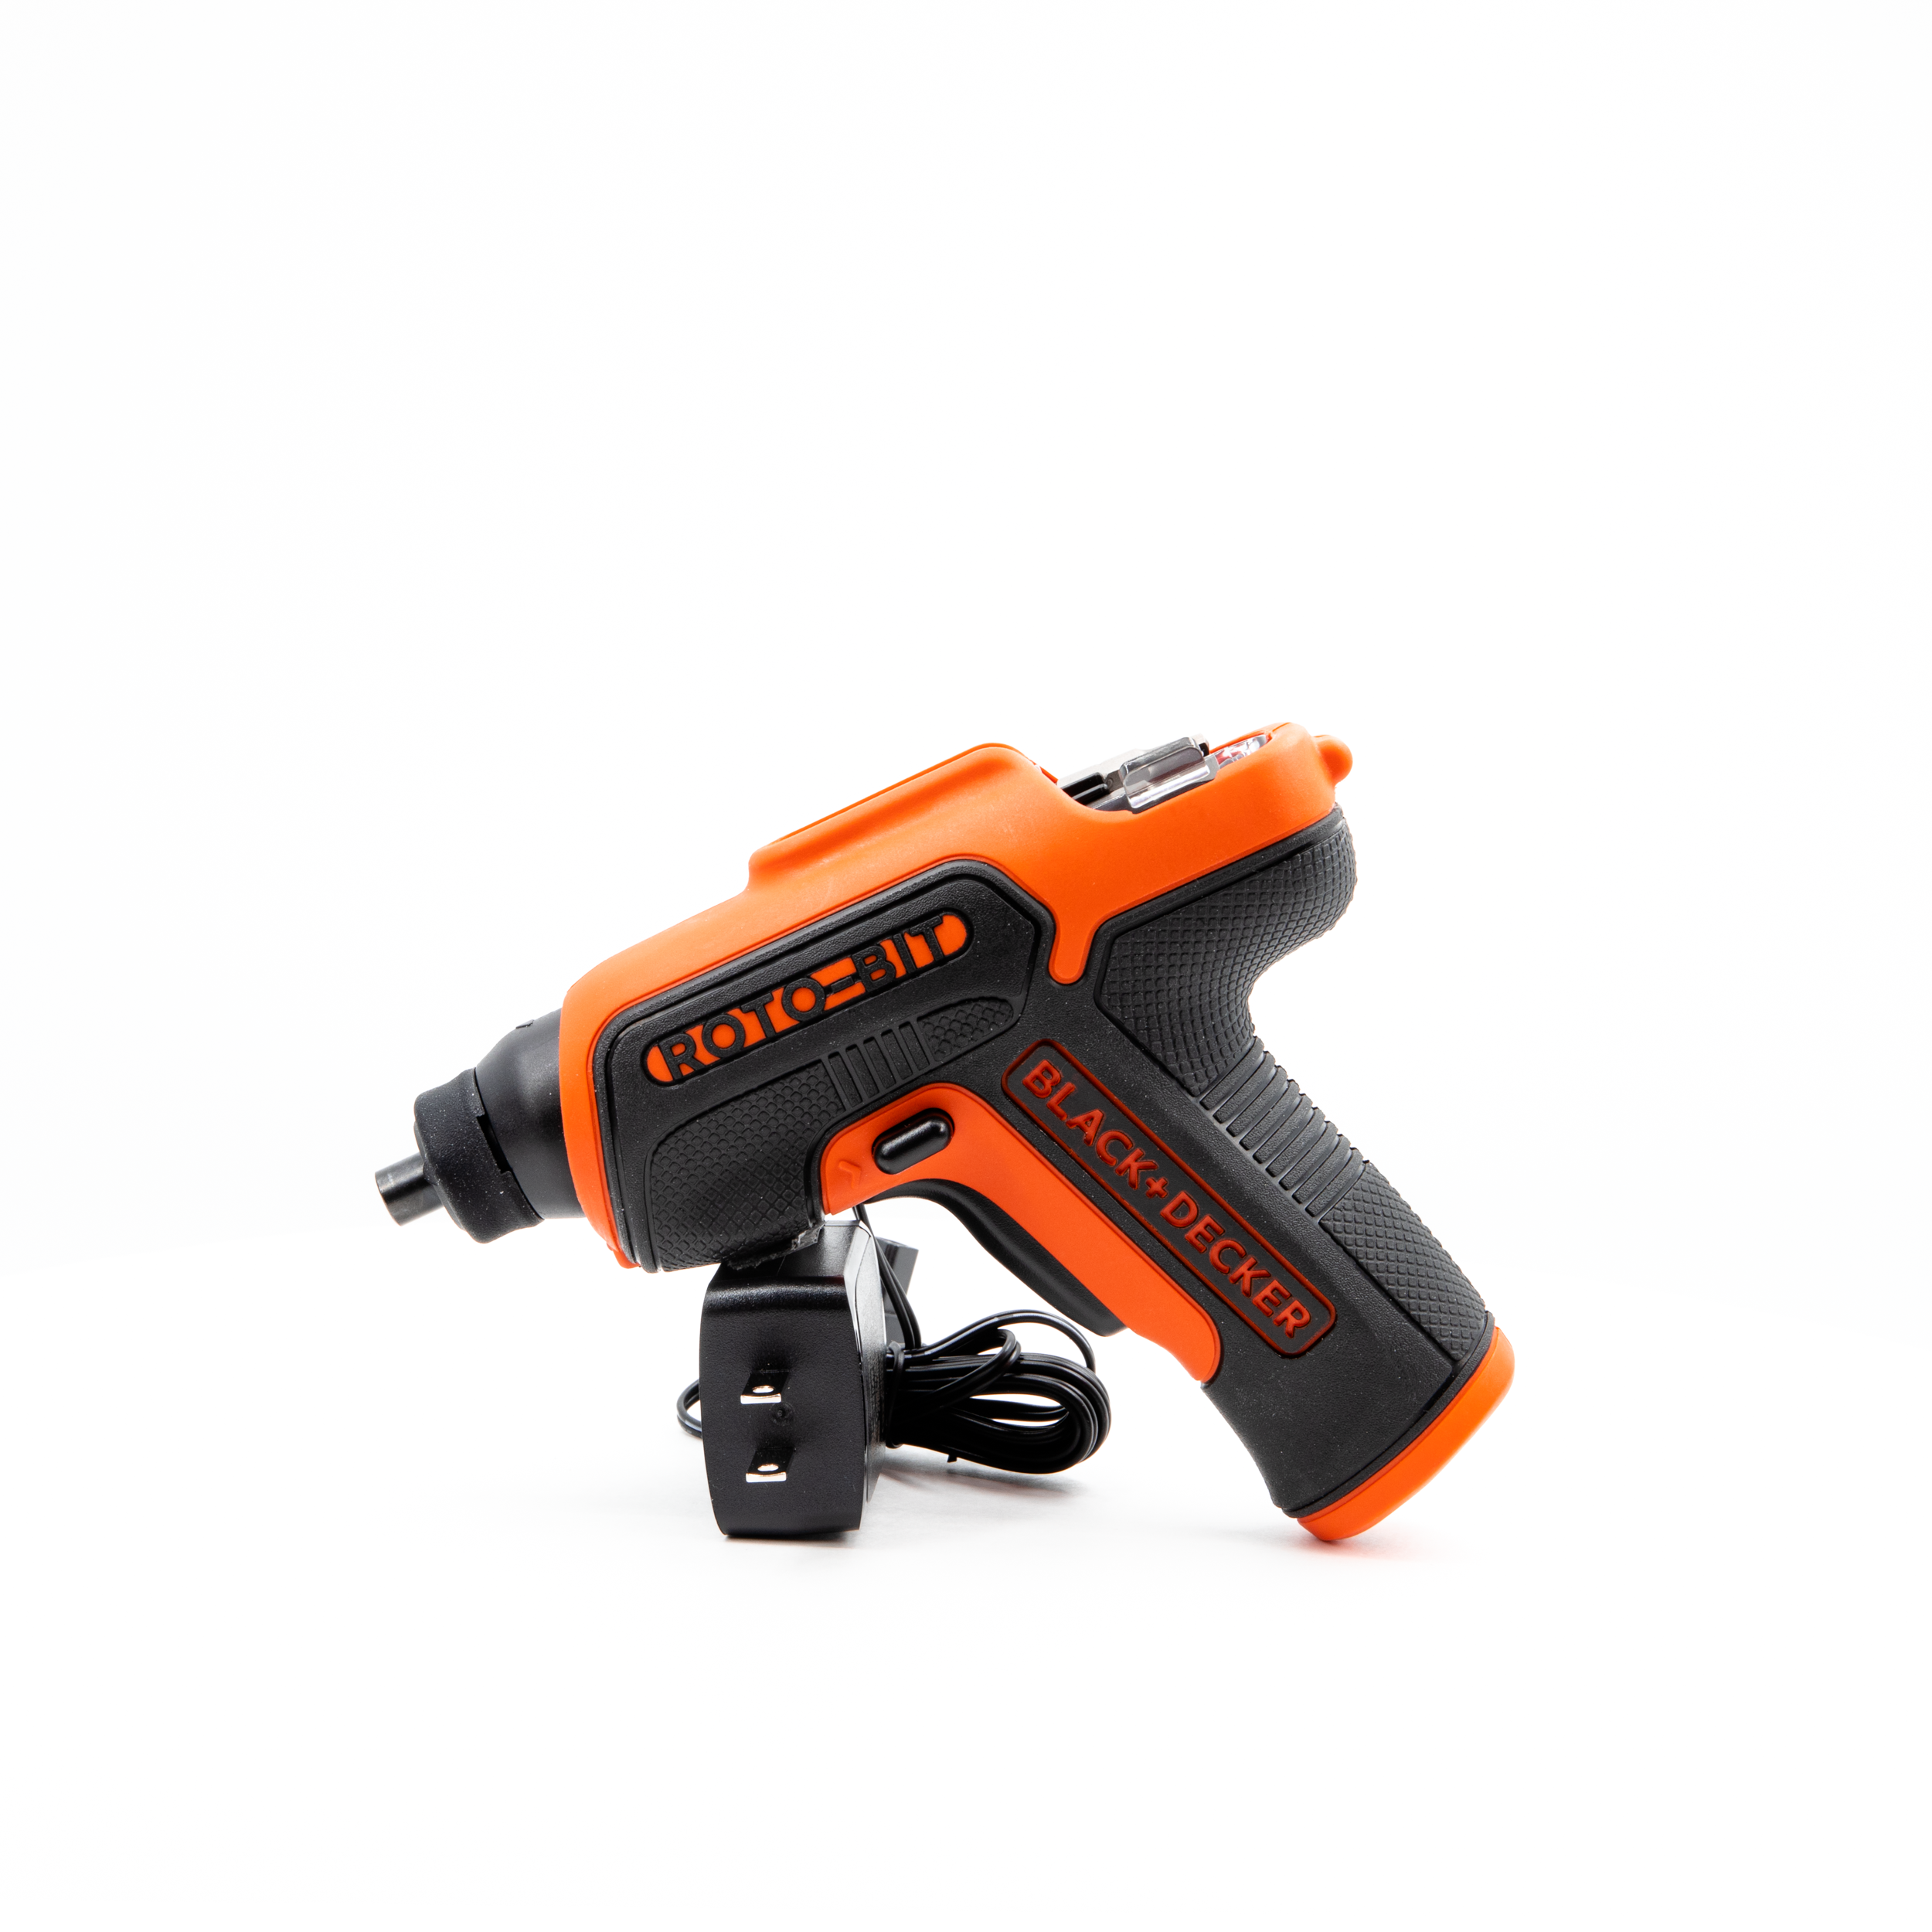 Black+Decker Roto-Bit lithium ion with multi-cutter attachment and